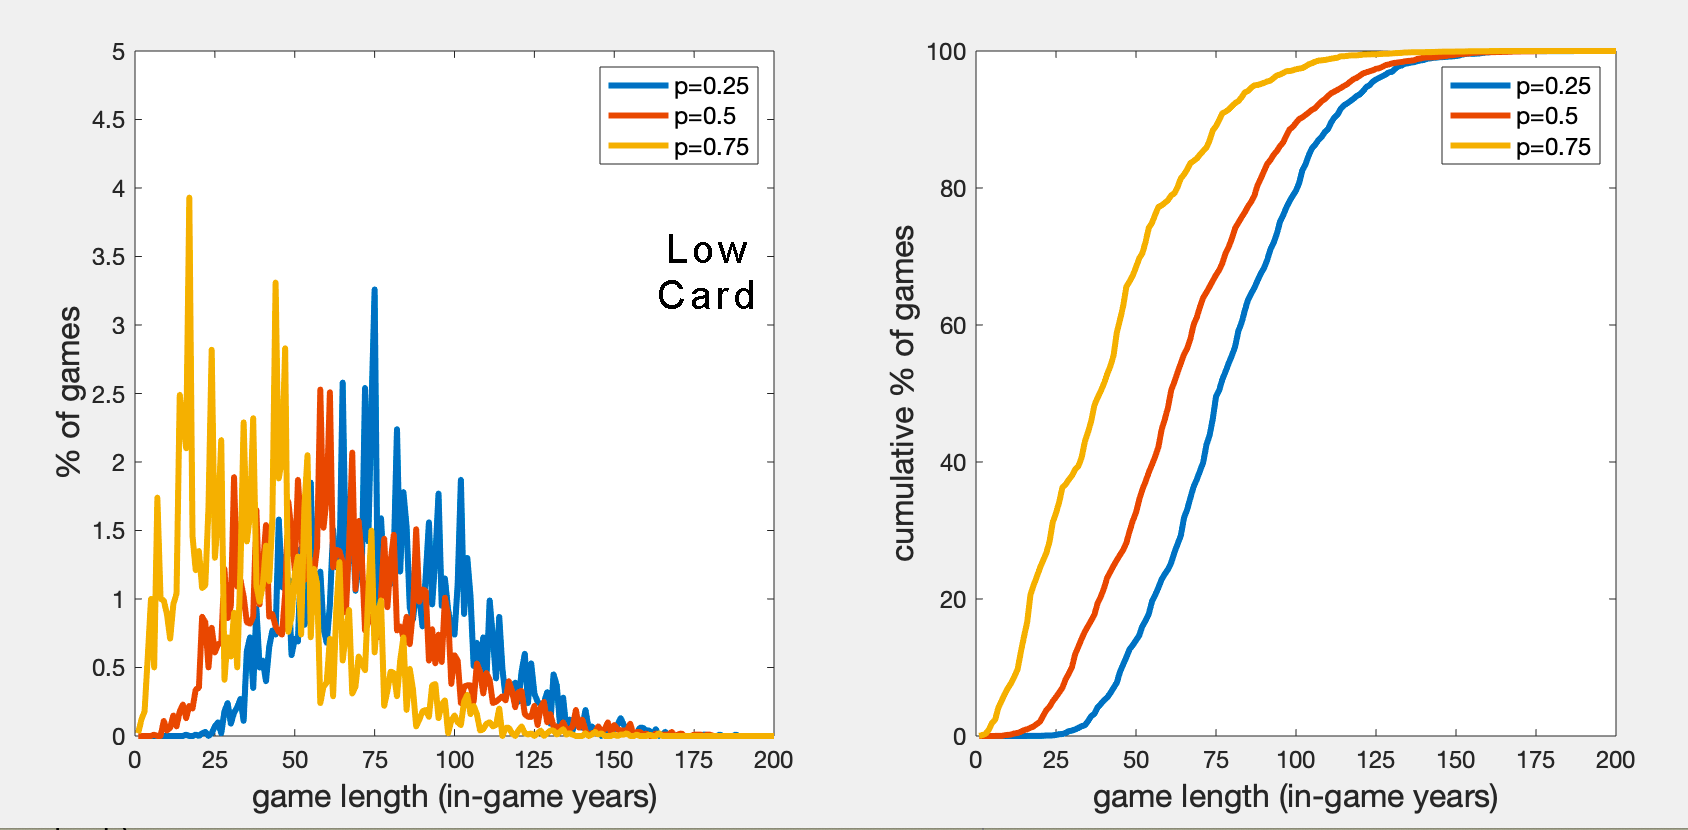 Plots for Q3 for Low Card mechanic